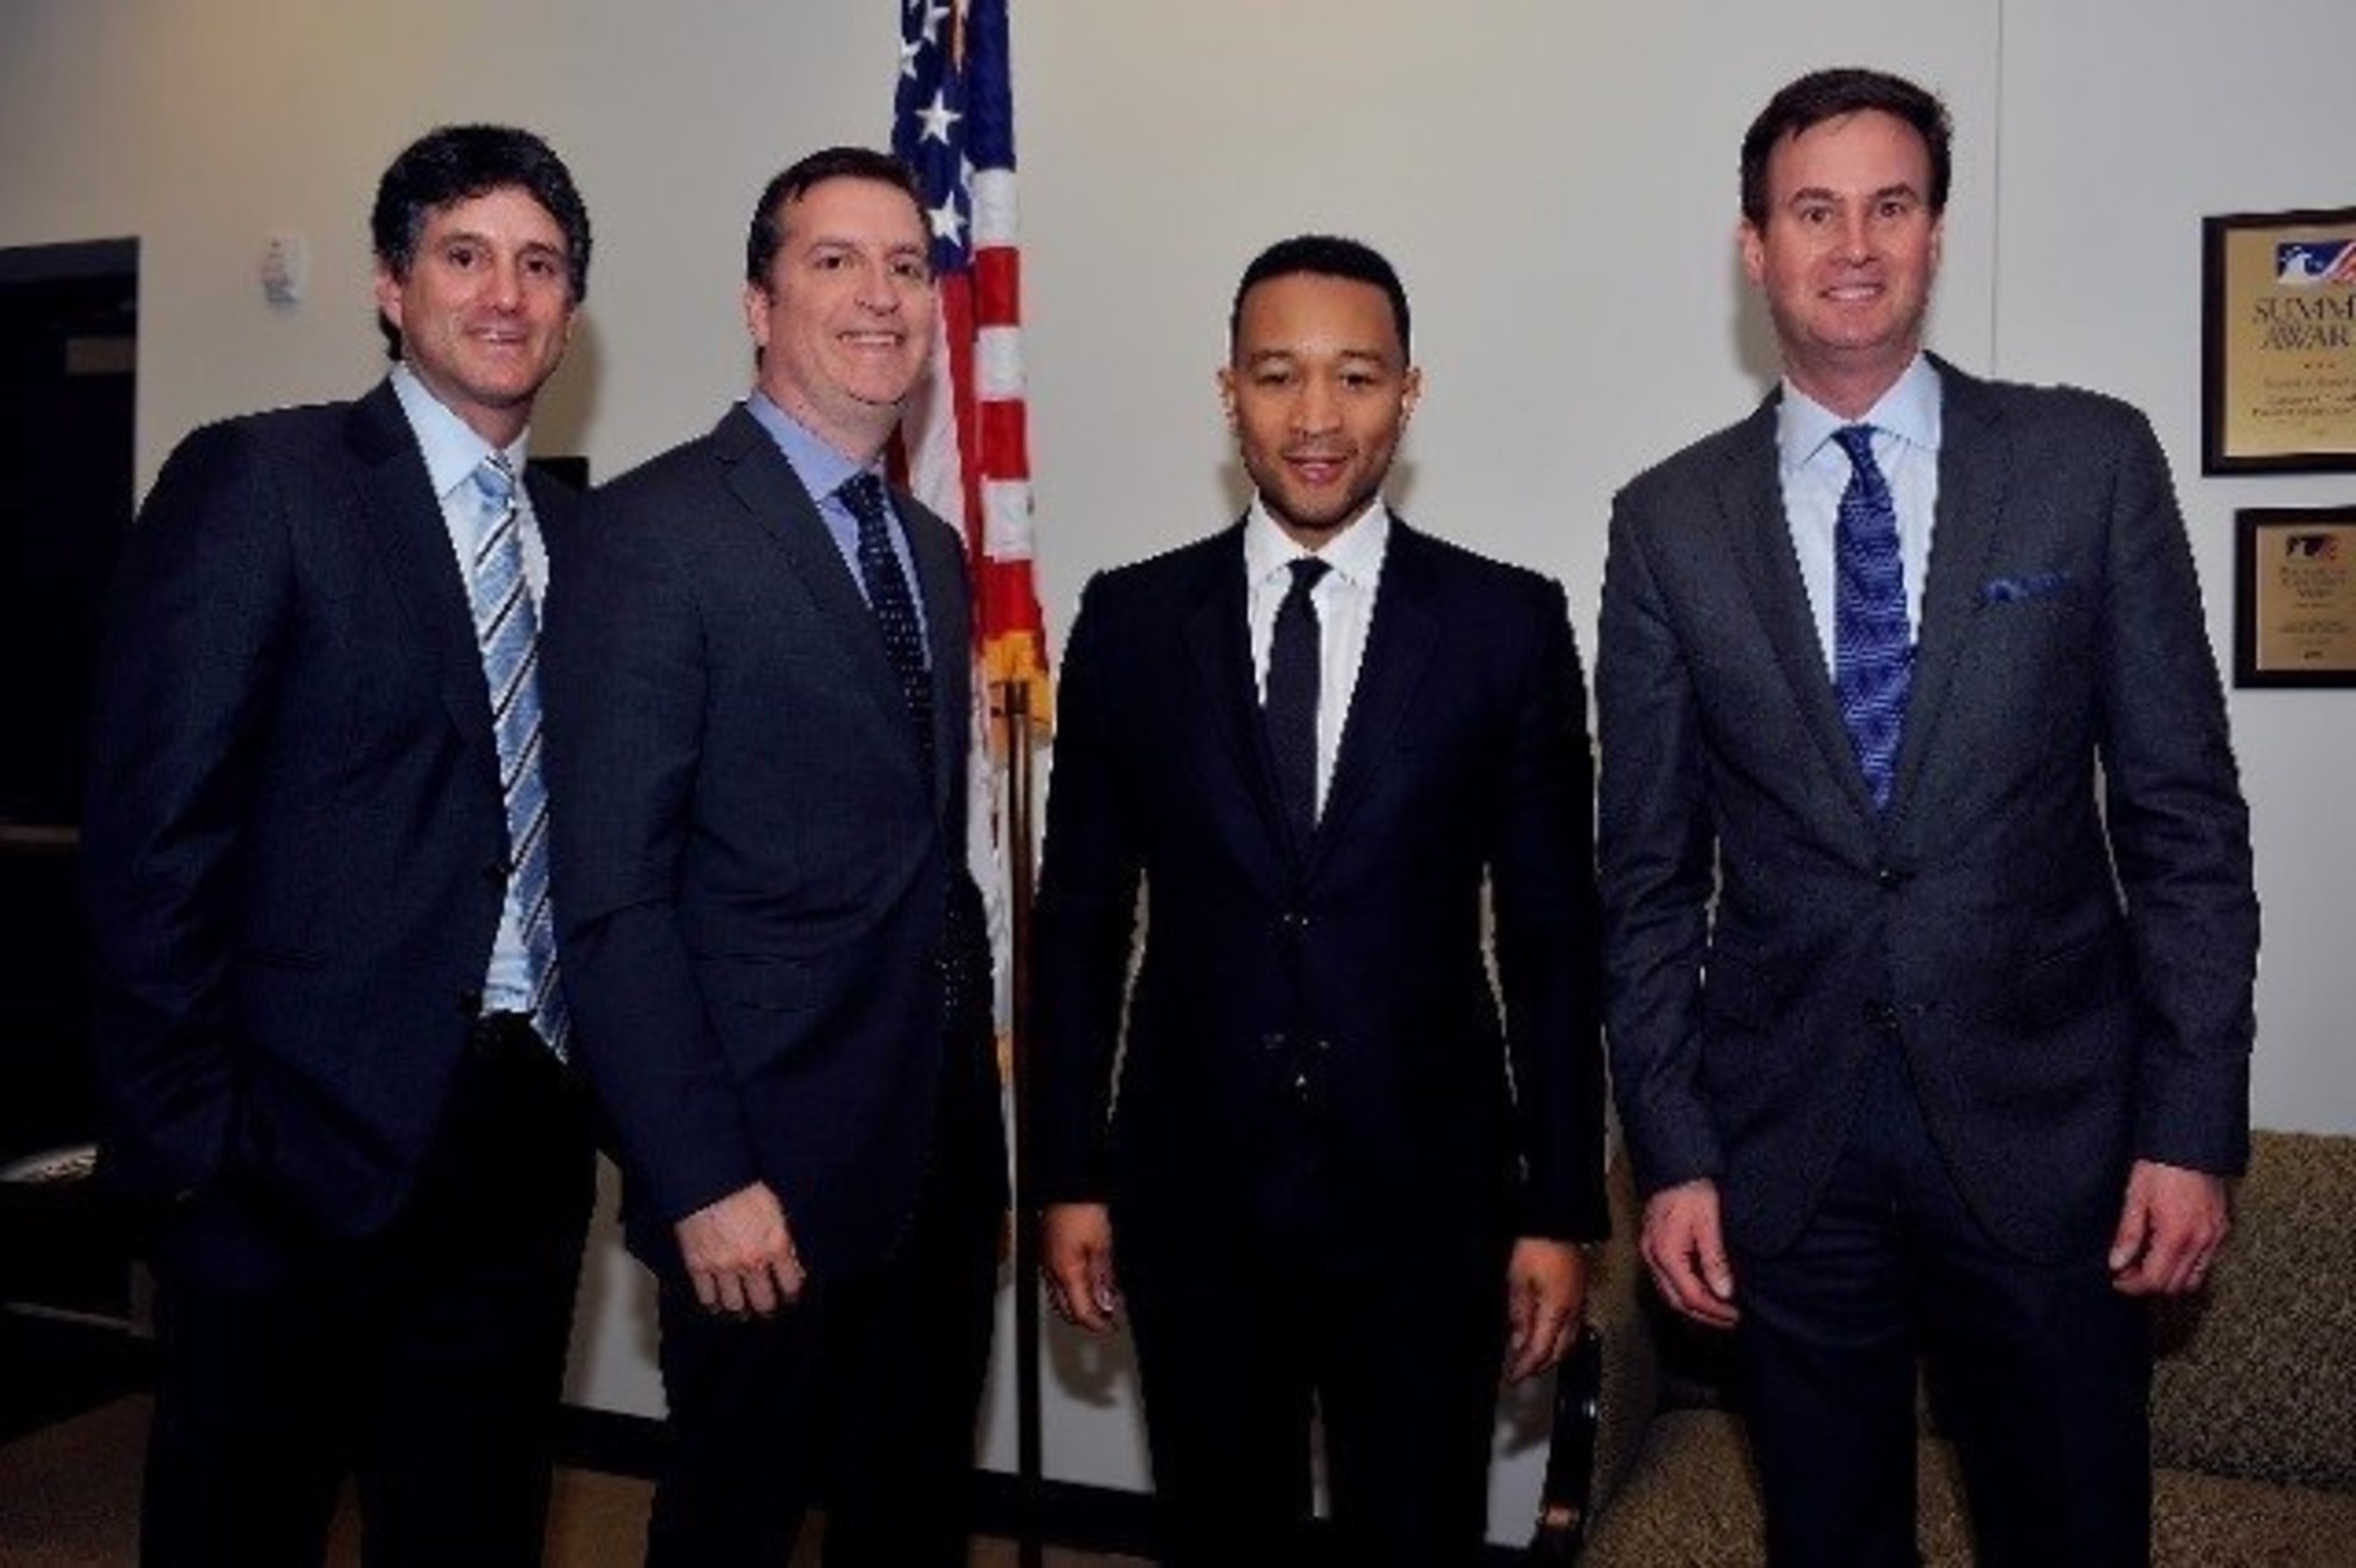 Jamie Erlicht (President, U.S. Programming and Production, Sony Pictures Television), Matt Cherniss (President and General Manager, WGN America), executive producer John Legend and Zack Van Amburg (President, U.S. Programming and Production, Sony Pictures Television)